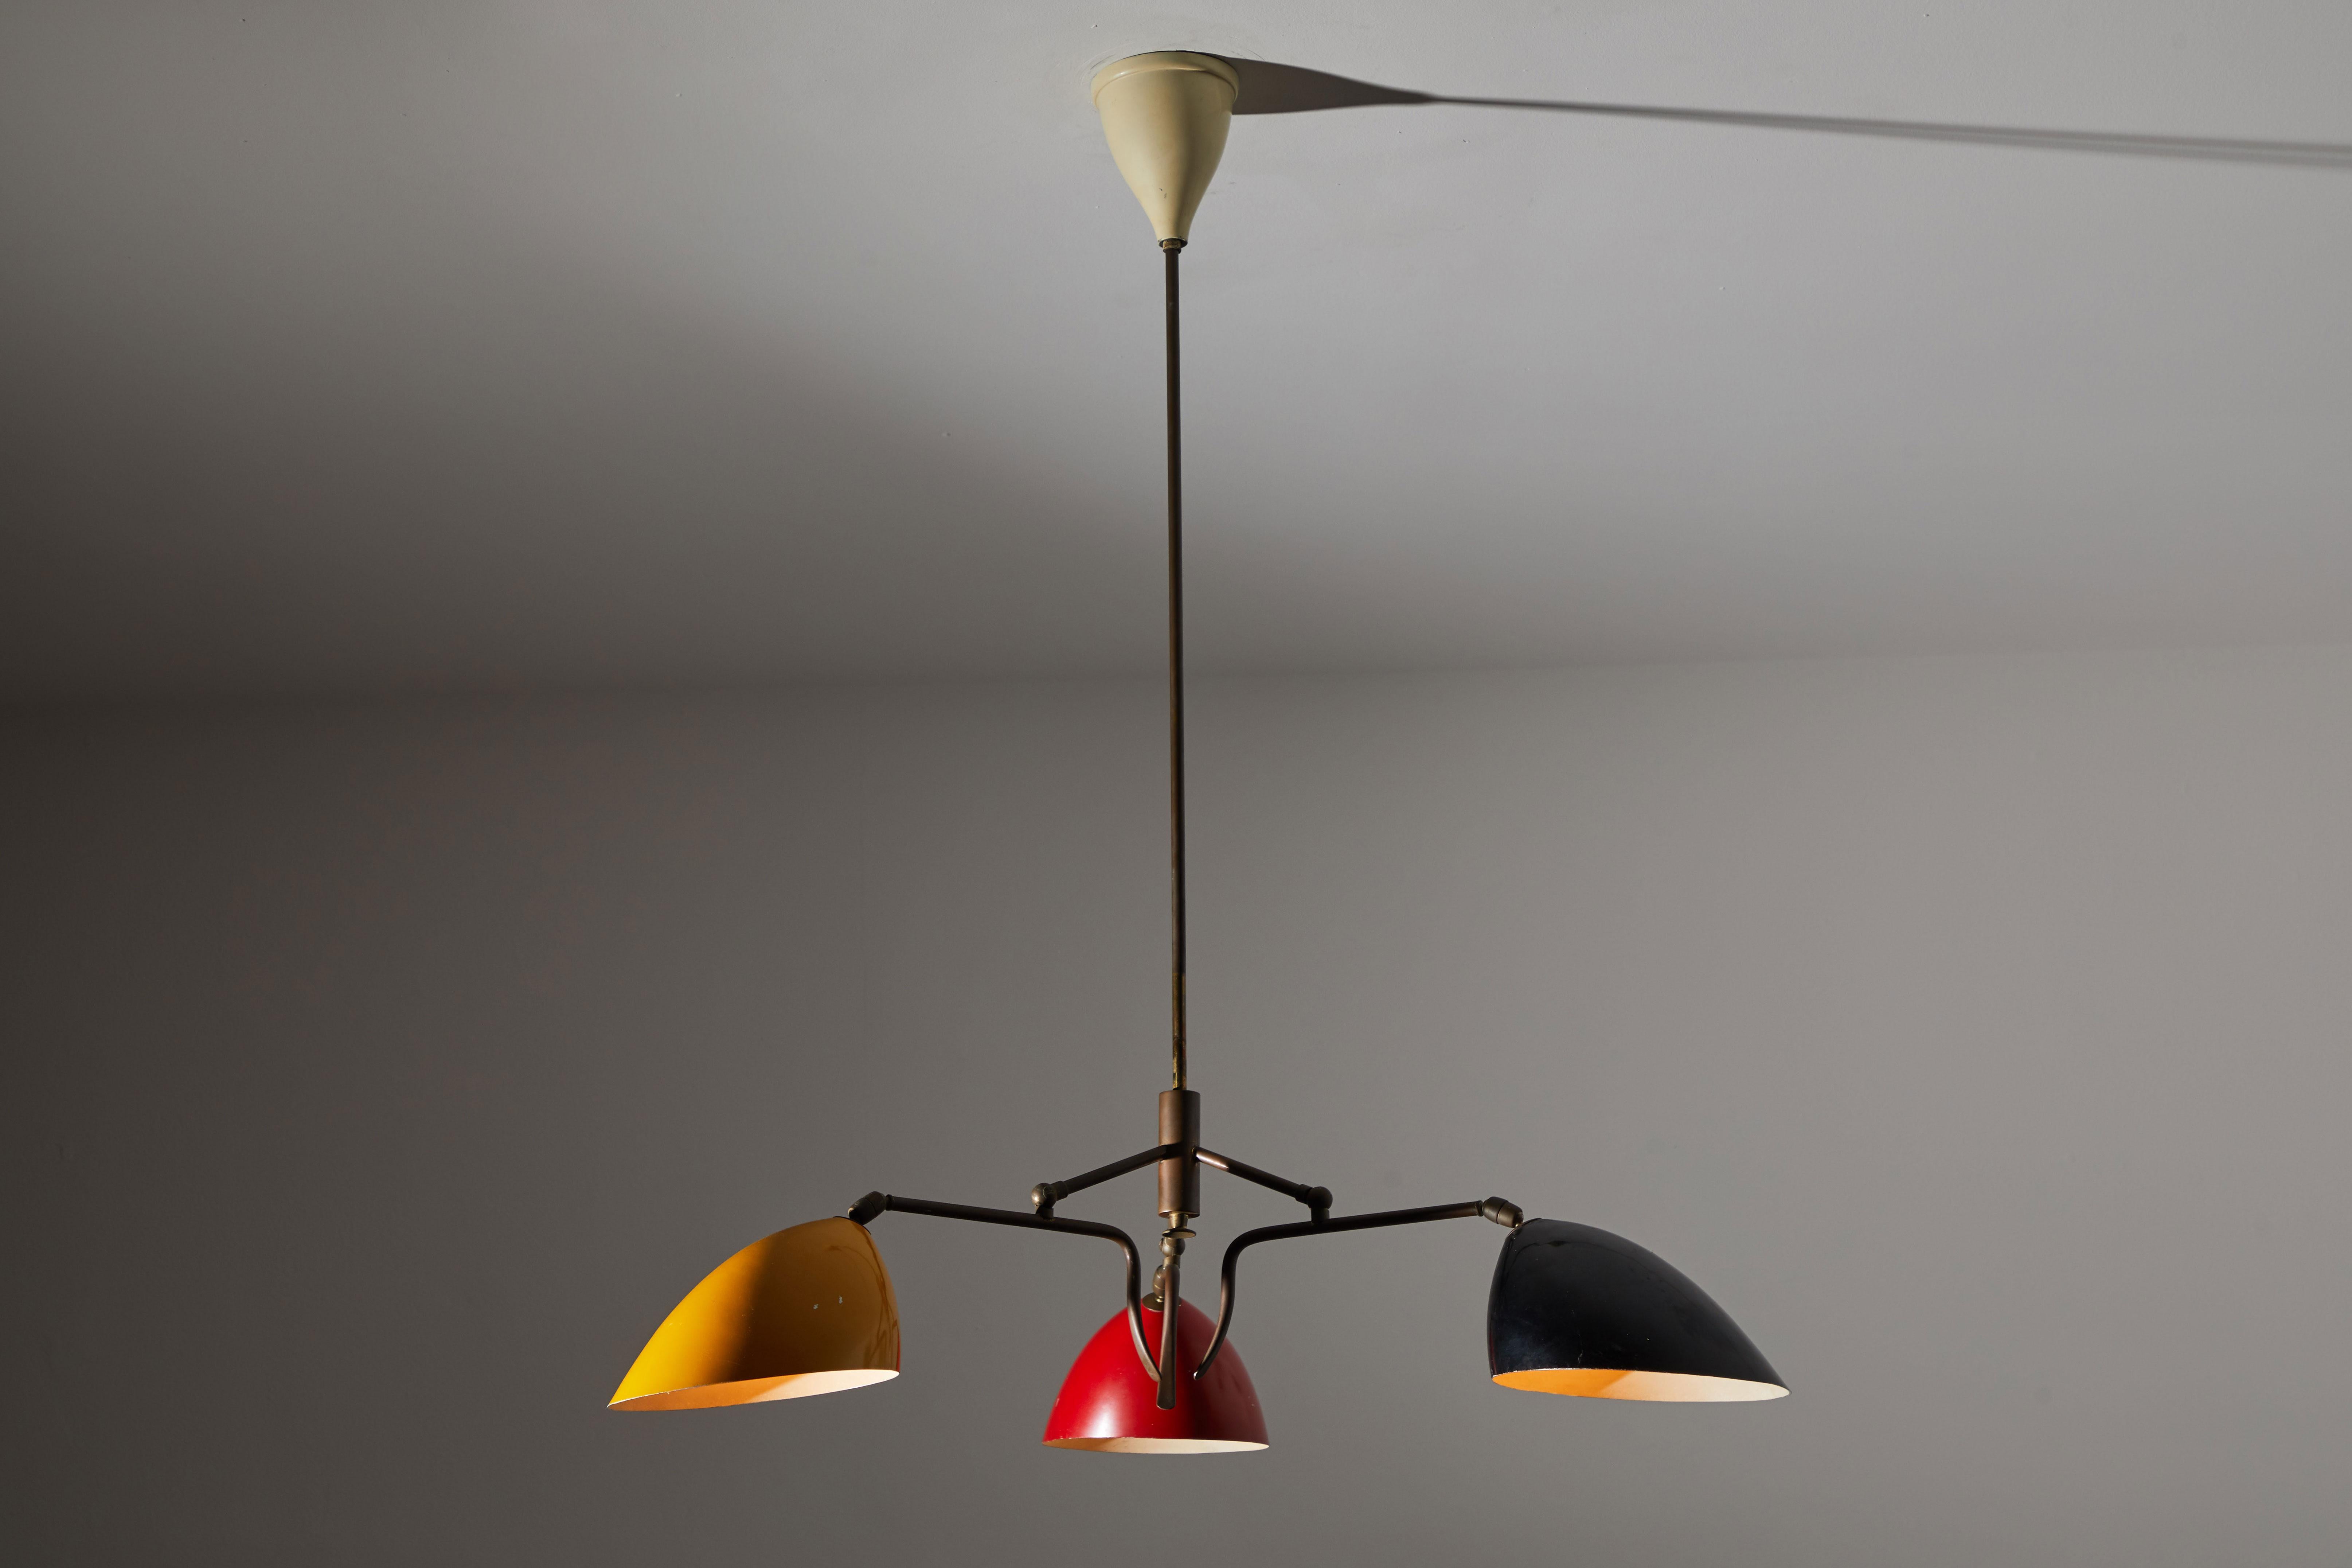 Three-arm chandelier by Lumen. Manufactured in Italy, circa 1950s. Brass and enameled metal. Shades articulate in various positions. Rewired for US junction boxes. Original canopy. Takes three E27 60w maximum bulbs.